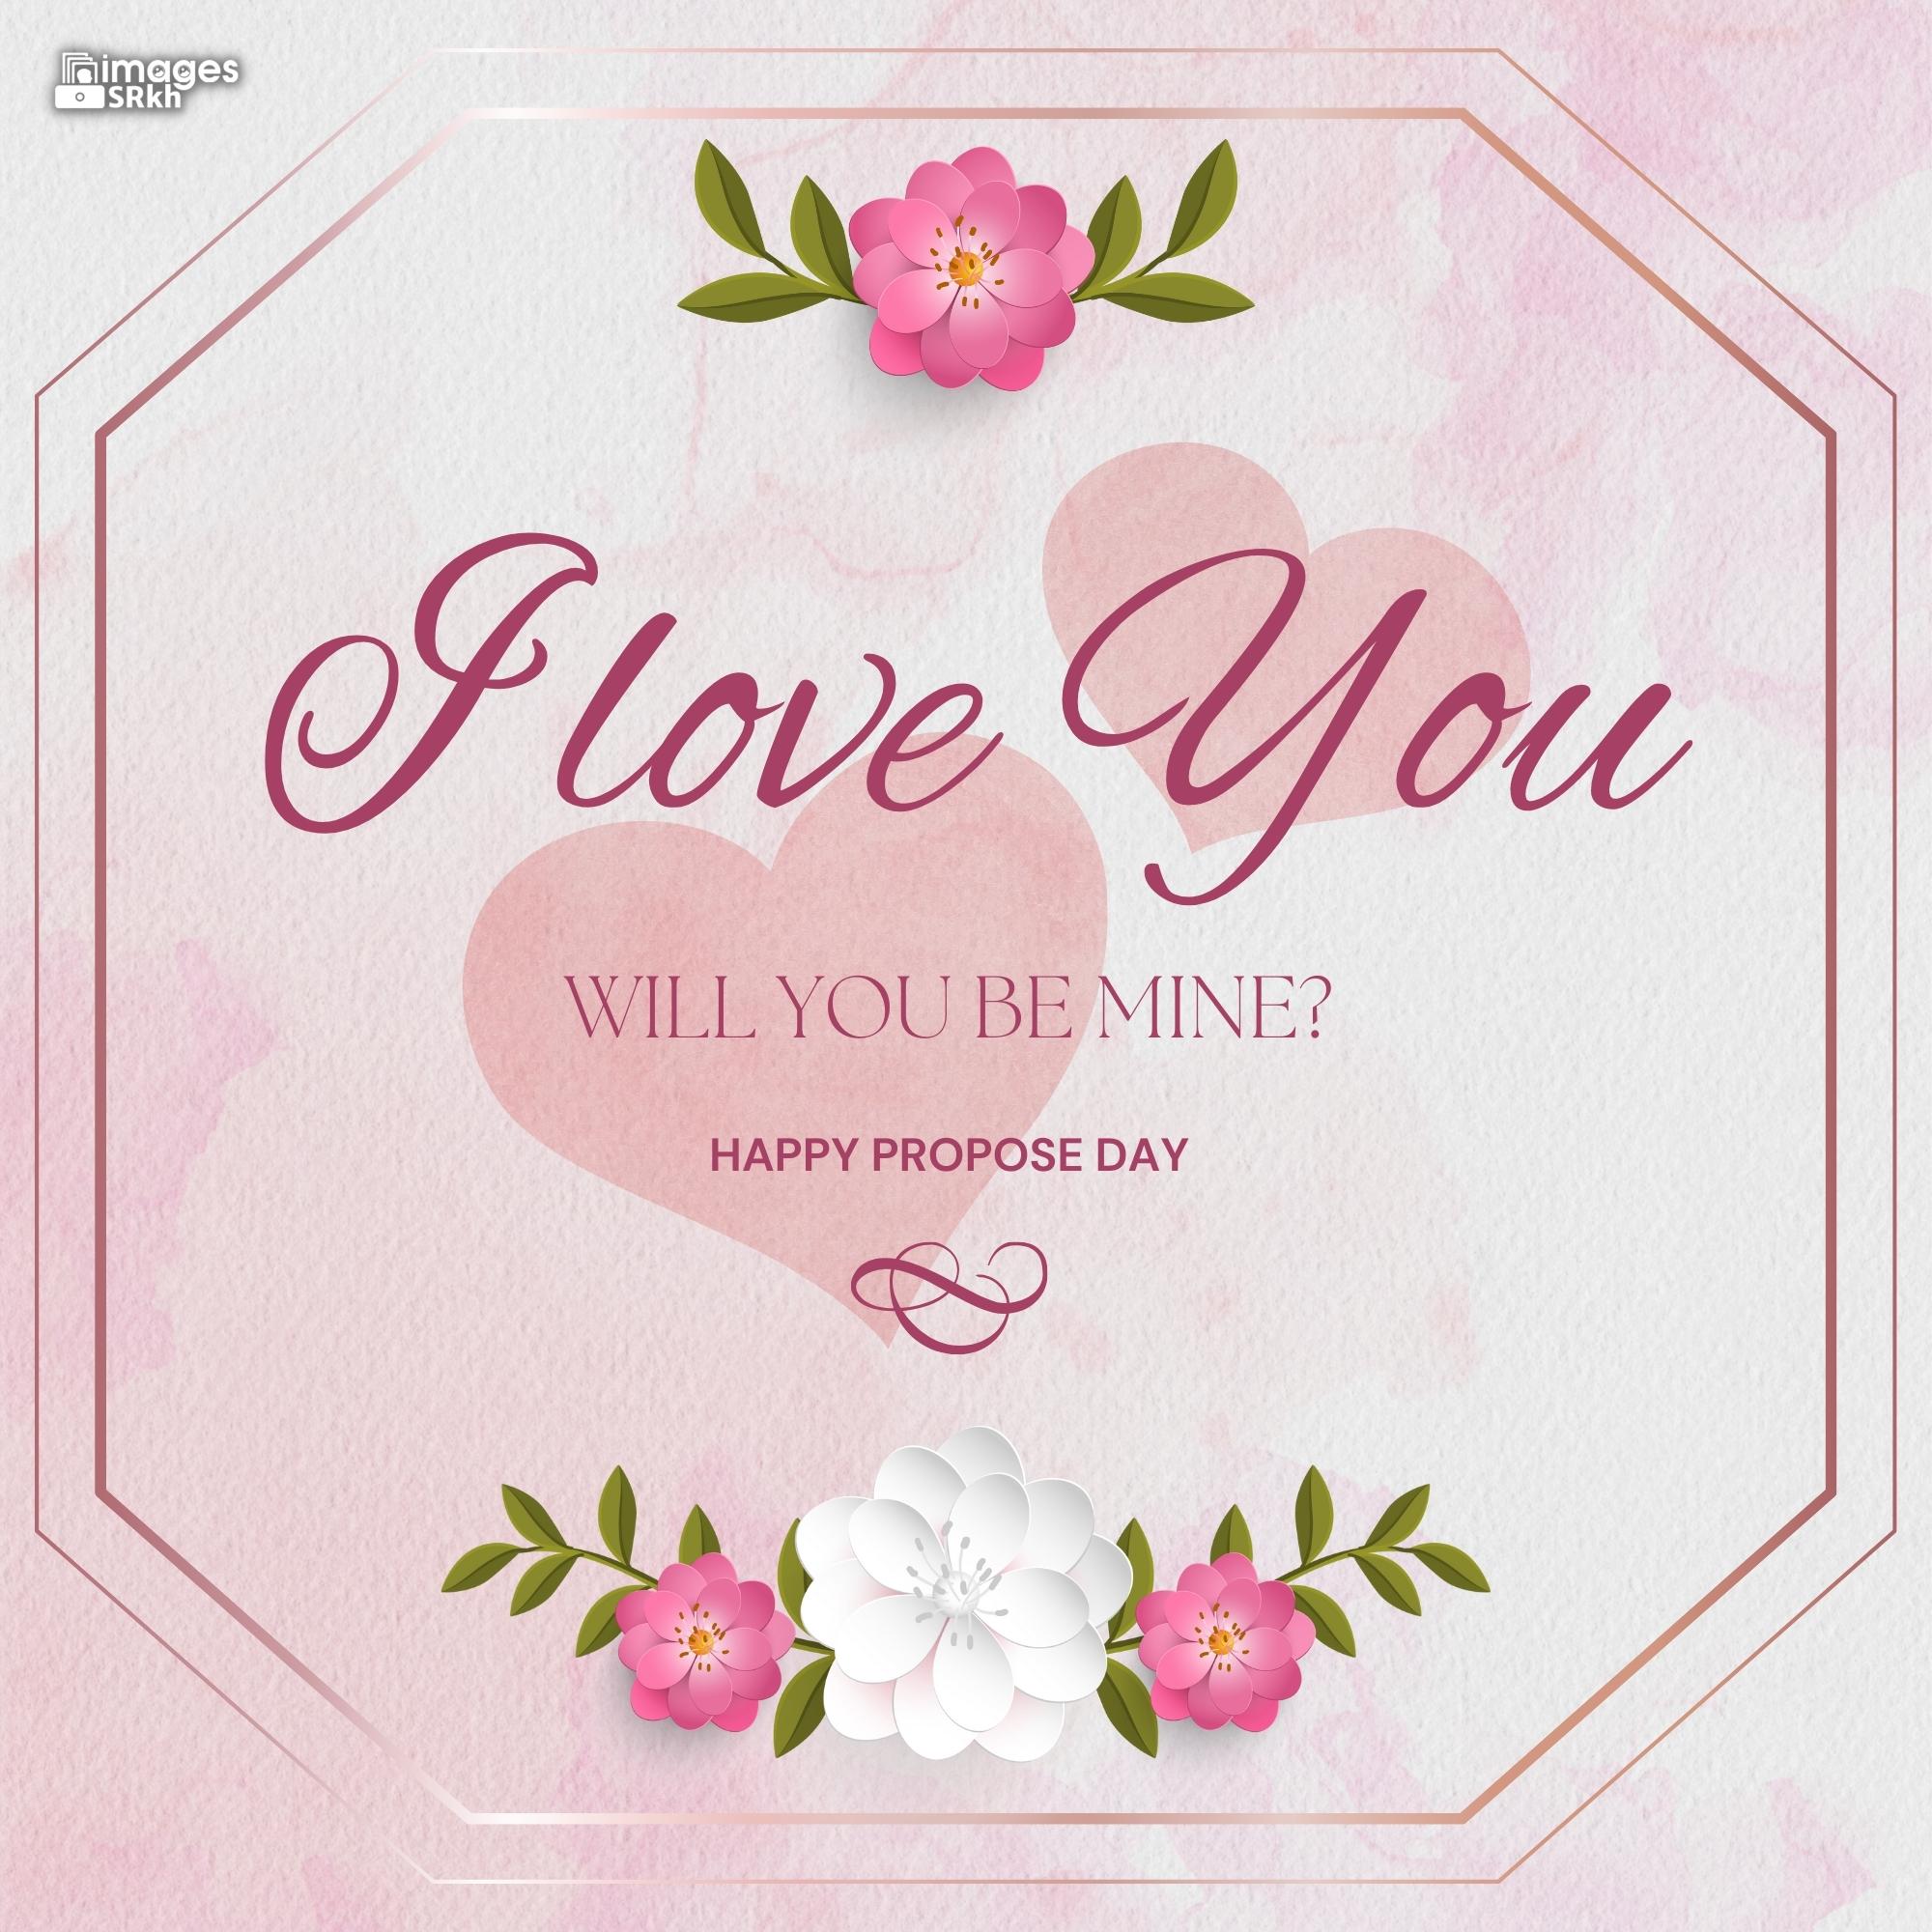 Happy Propose Day Images | 451 | I love you will you be mine